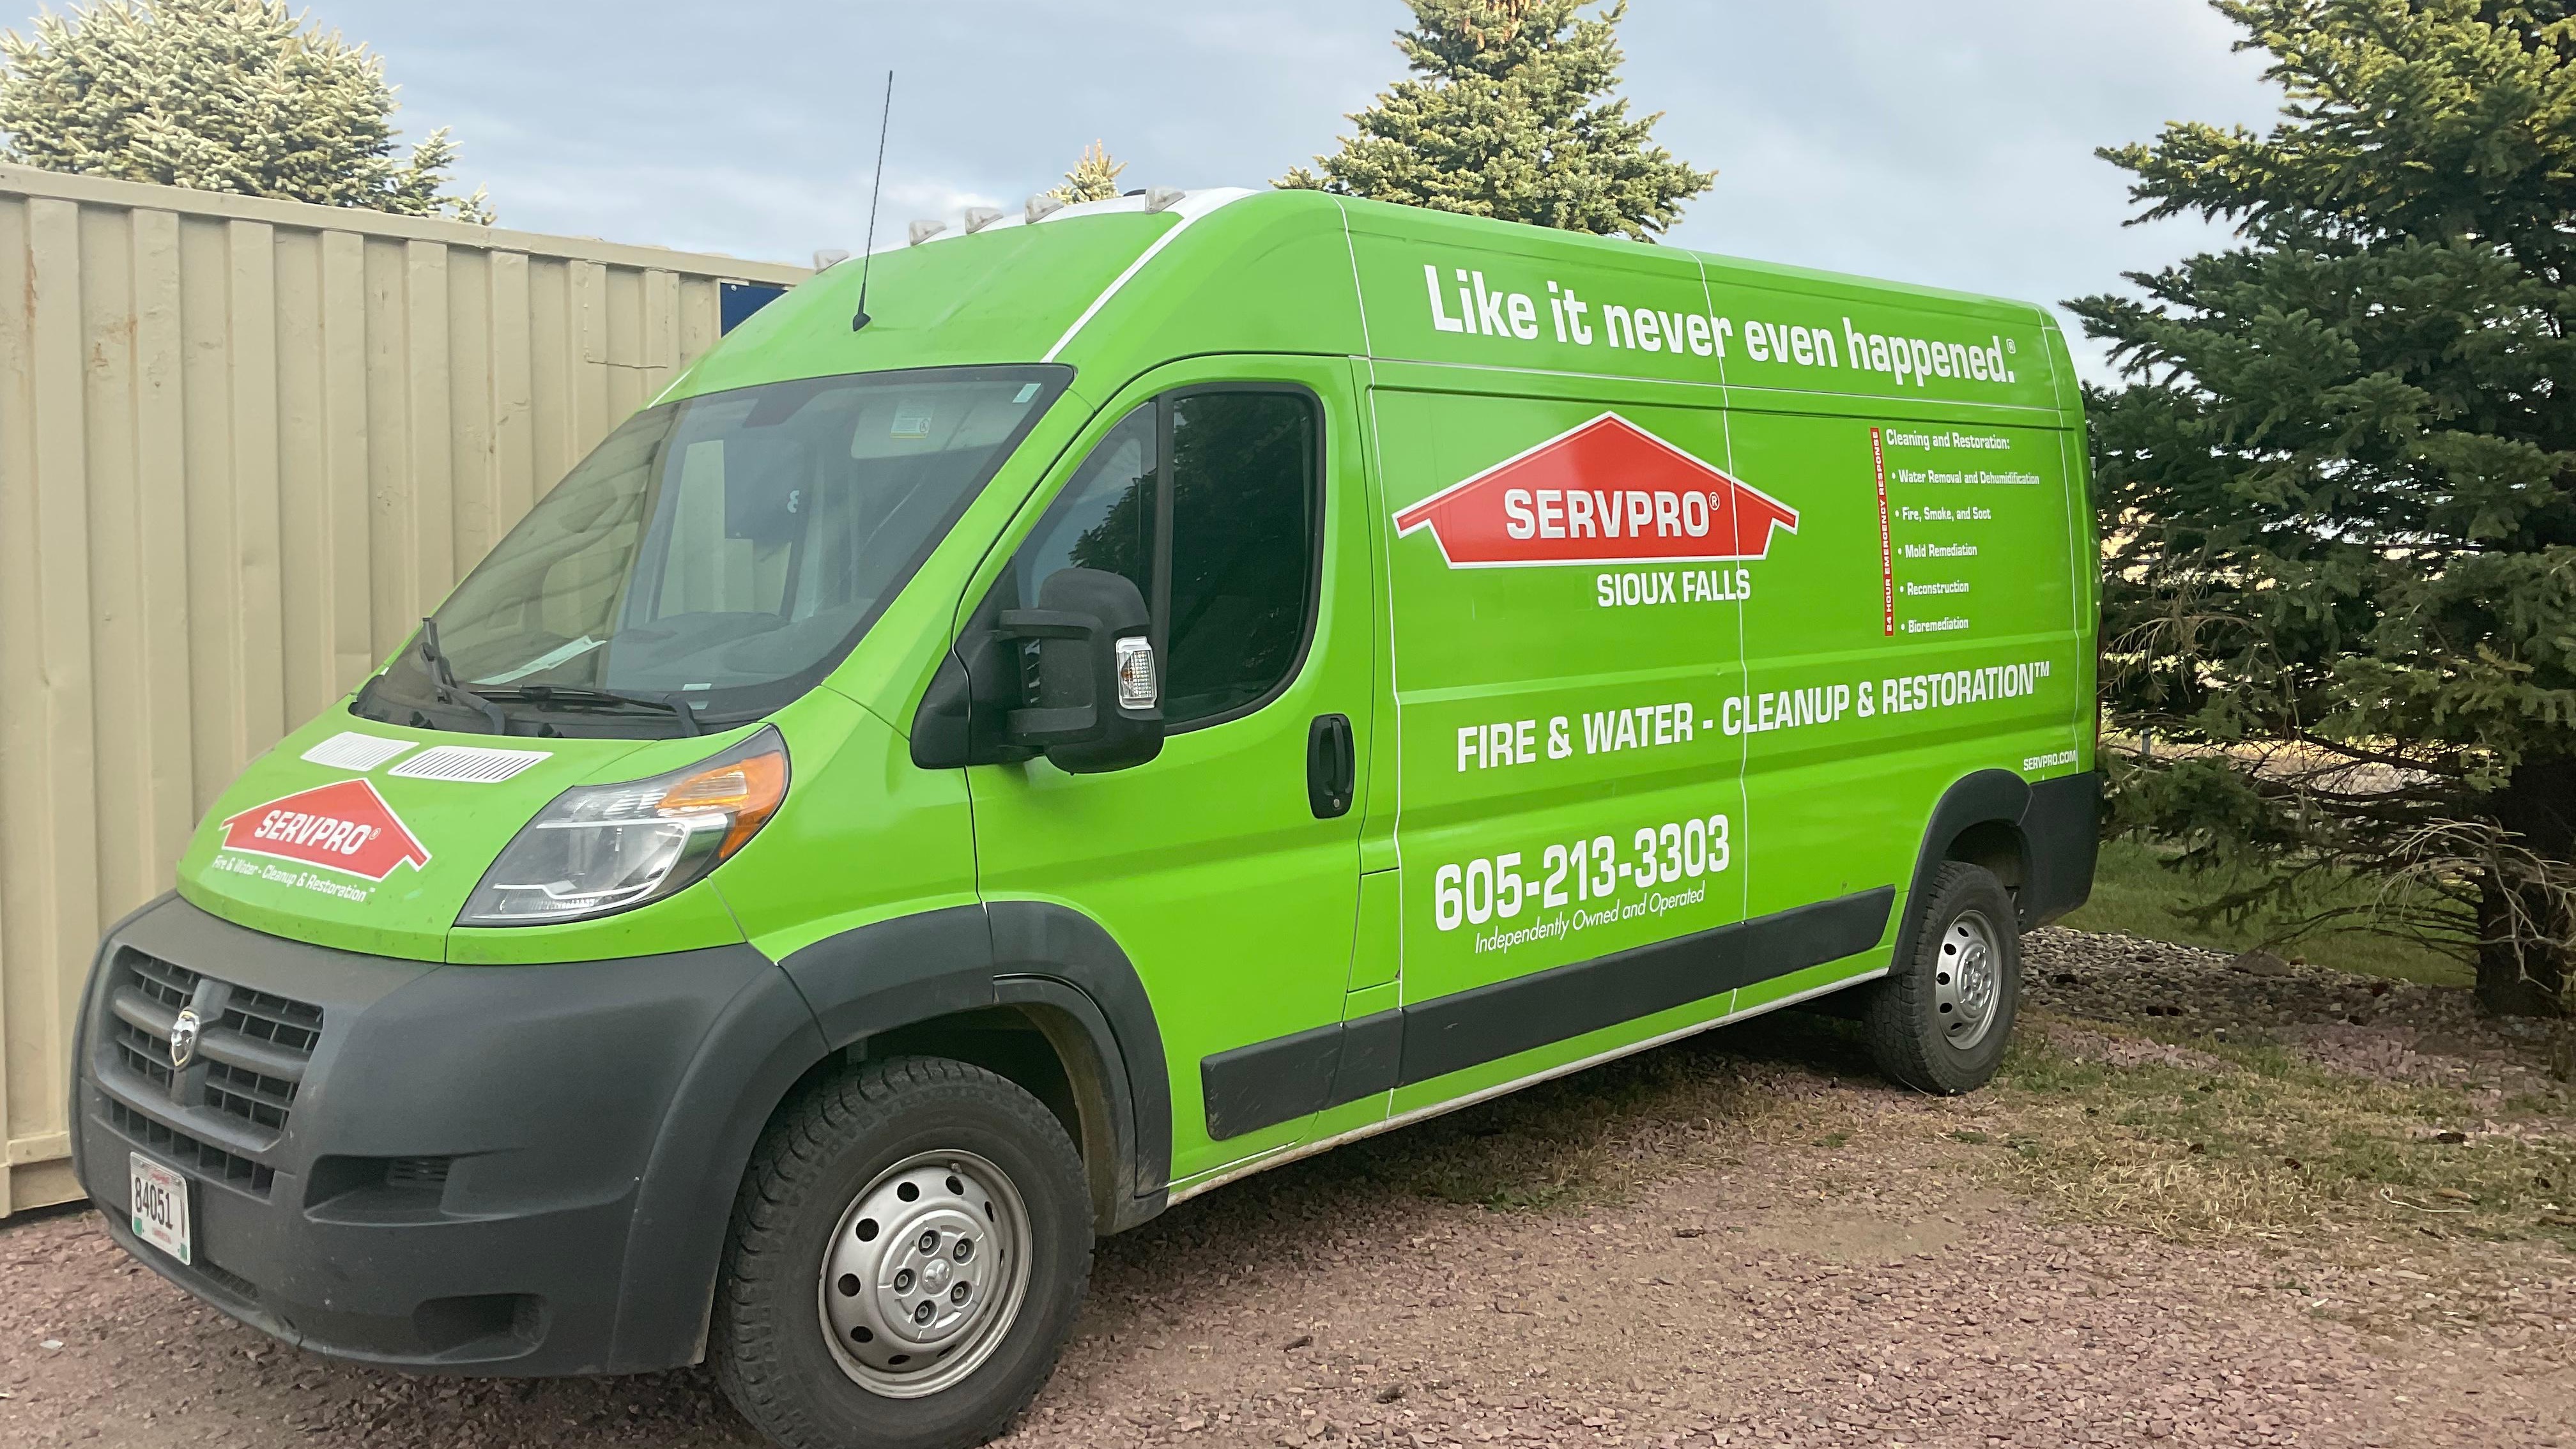 SERVPRO of Sioux Falls vehicle ready to respond to water or fire damage.